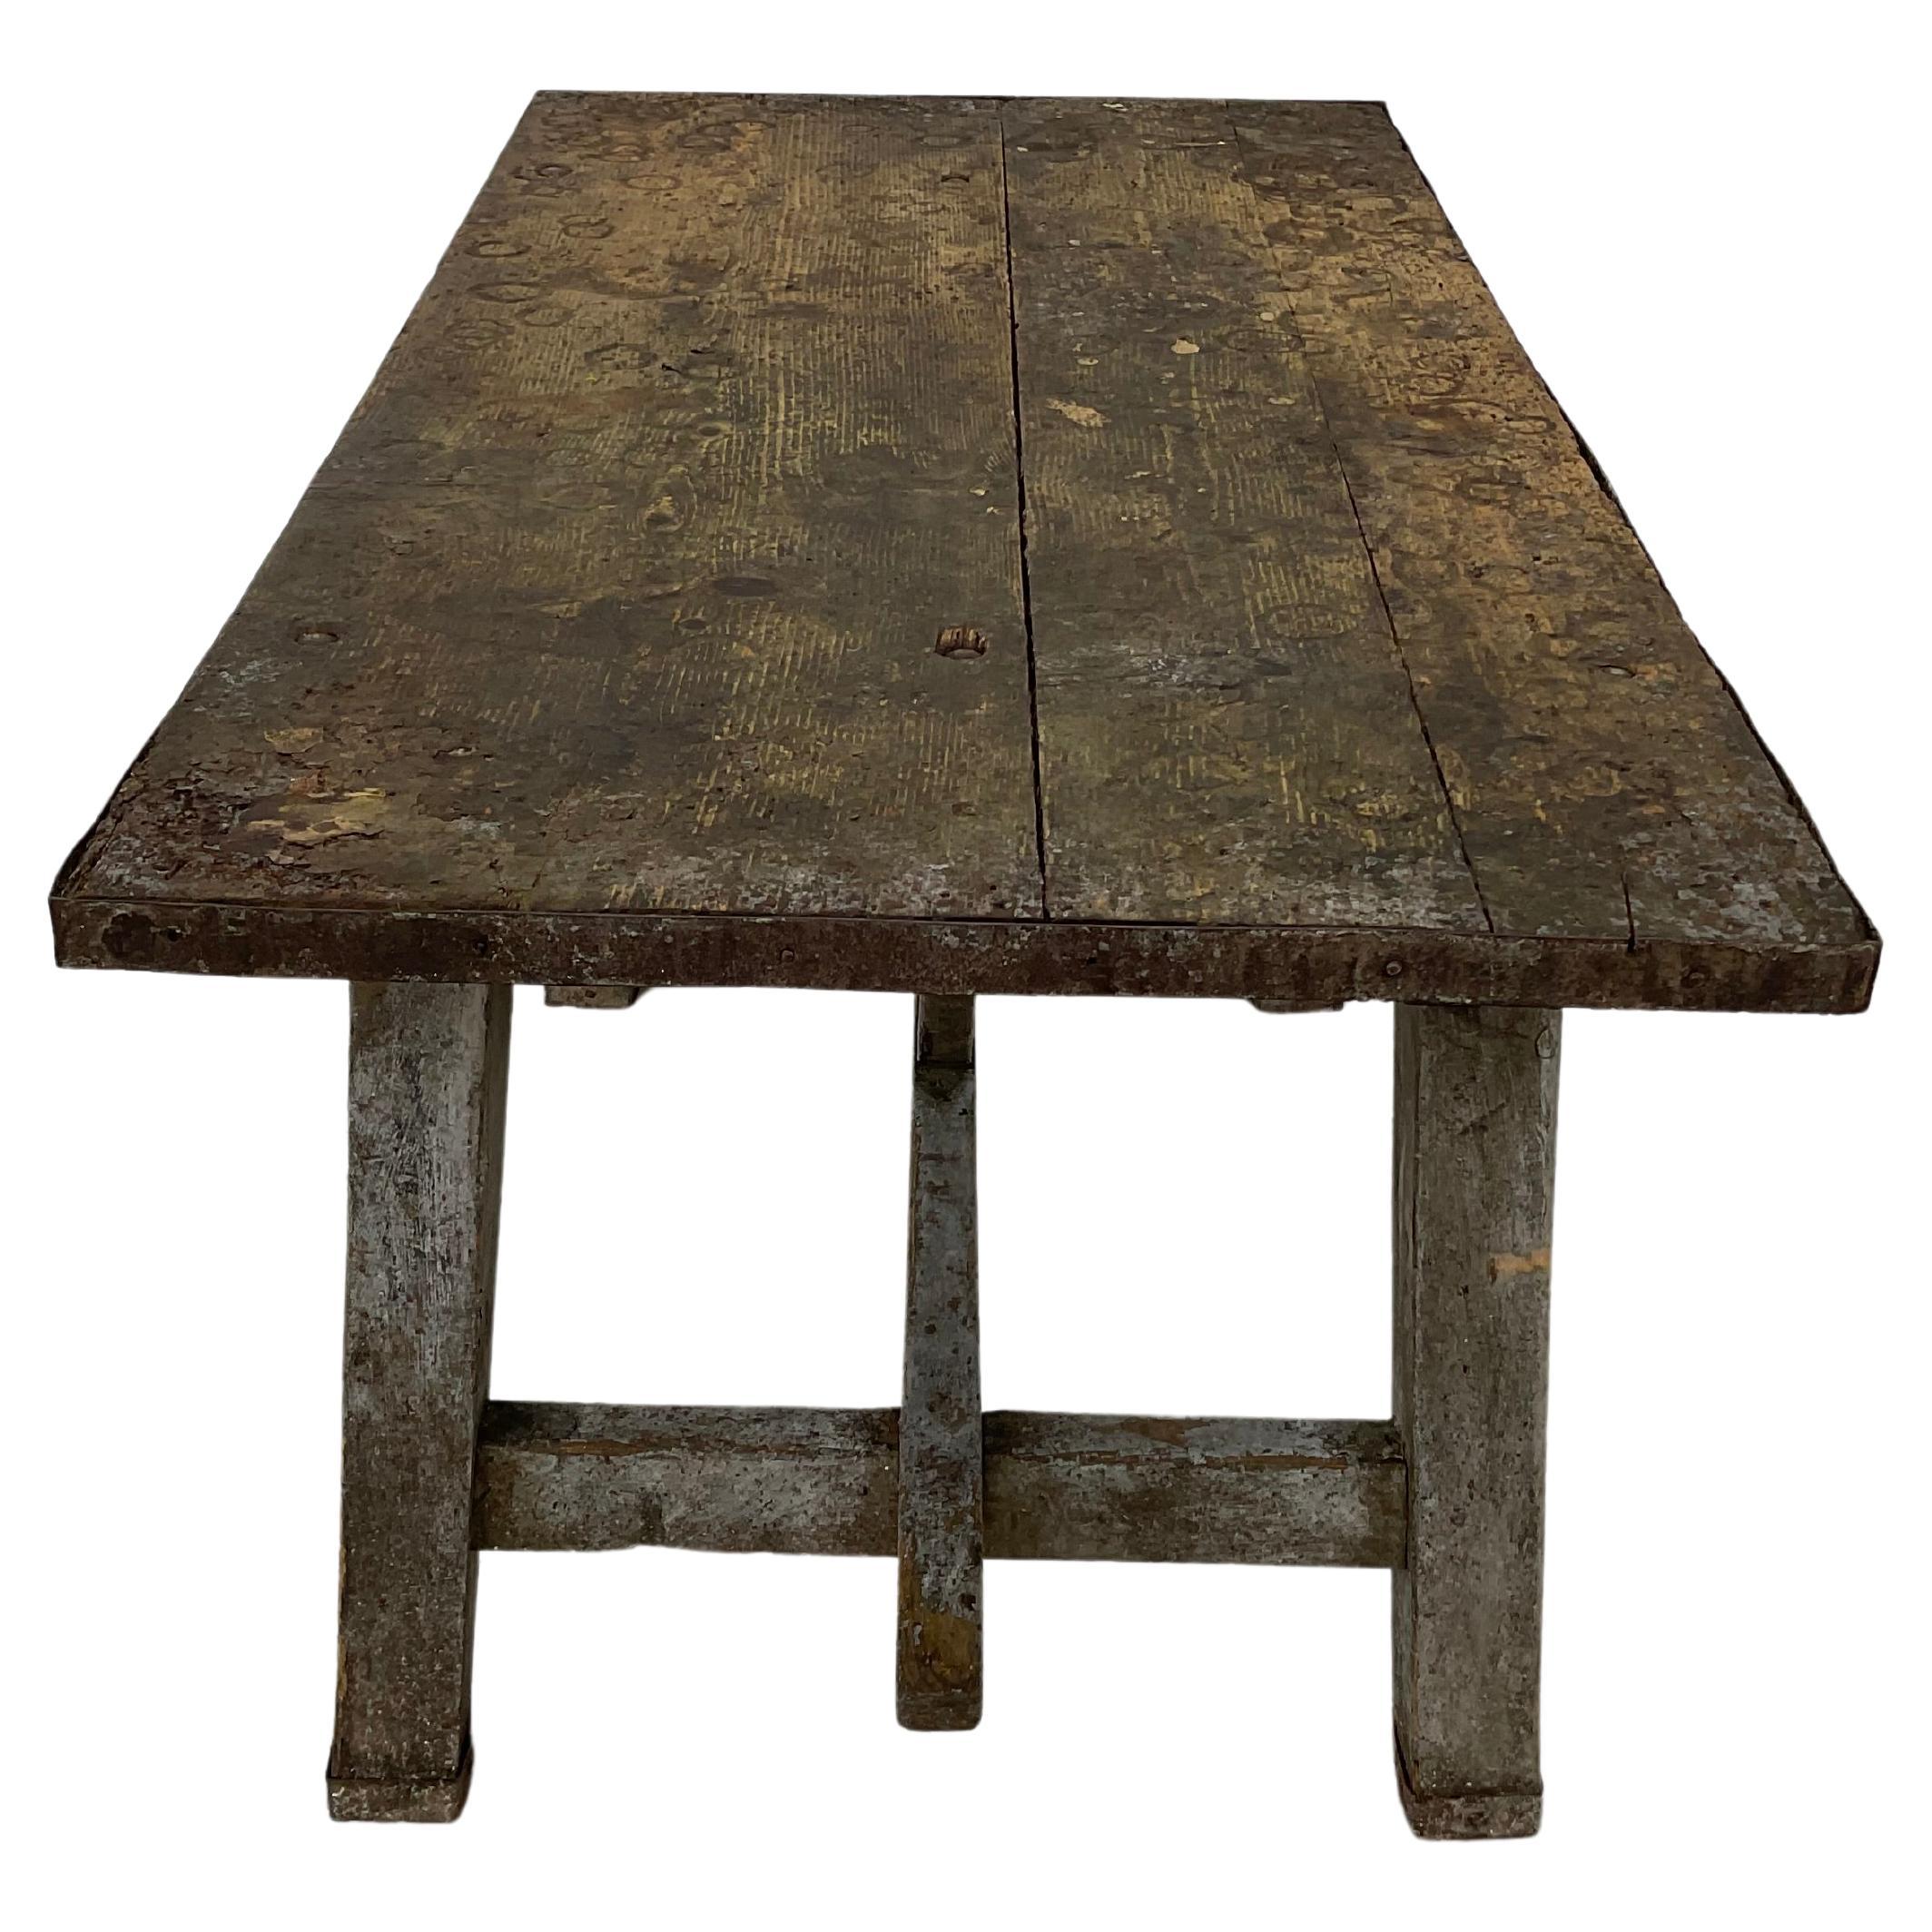 19th Century French Rustic Industrial Dining or Writing Table or Desk In Good Condition For Sale In Bradenton, FL